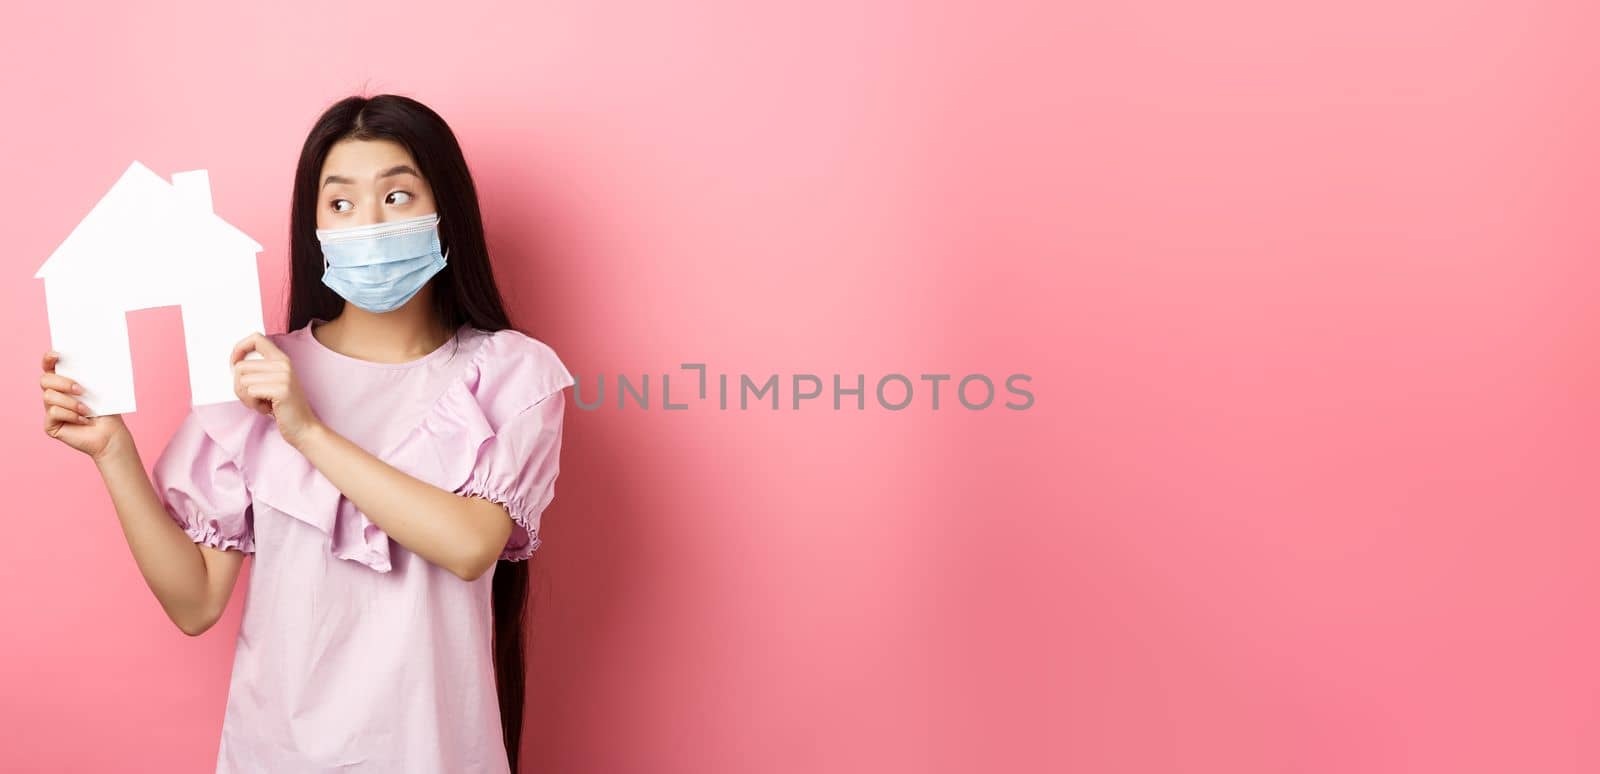 Real estate and pandemic concept. Cute asian woman in medical mask showing paper house cutout, searching for property. standing against pink background.